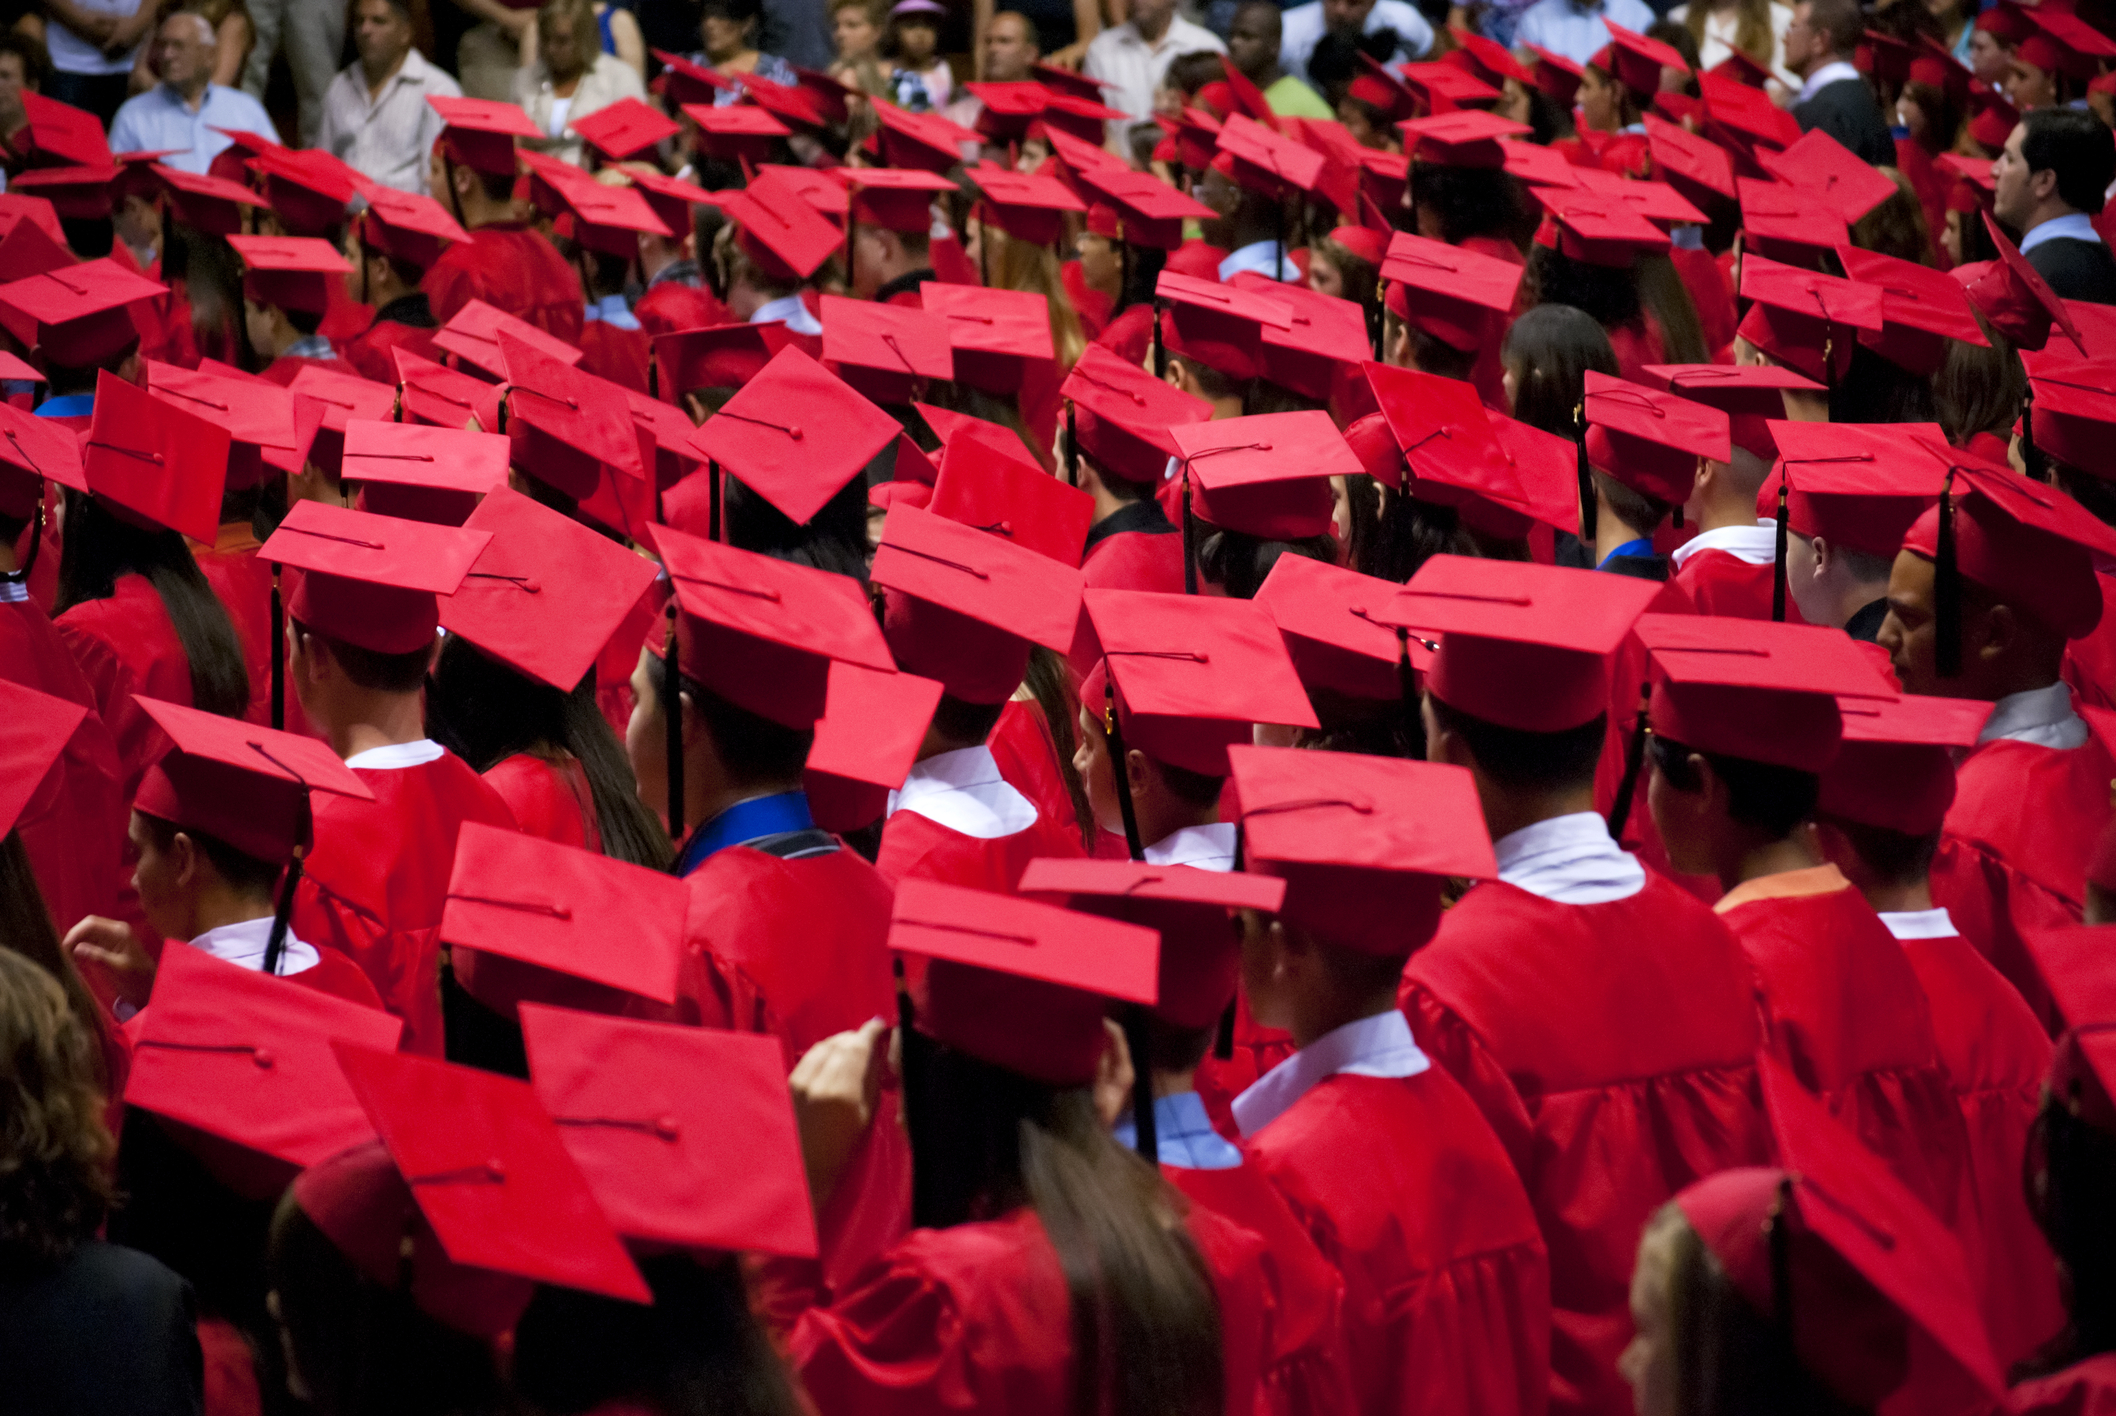 Graduates-red-cap-and-gown